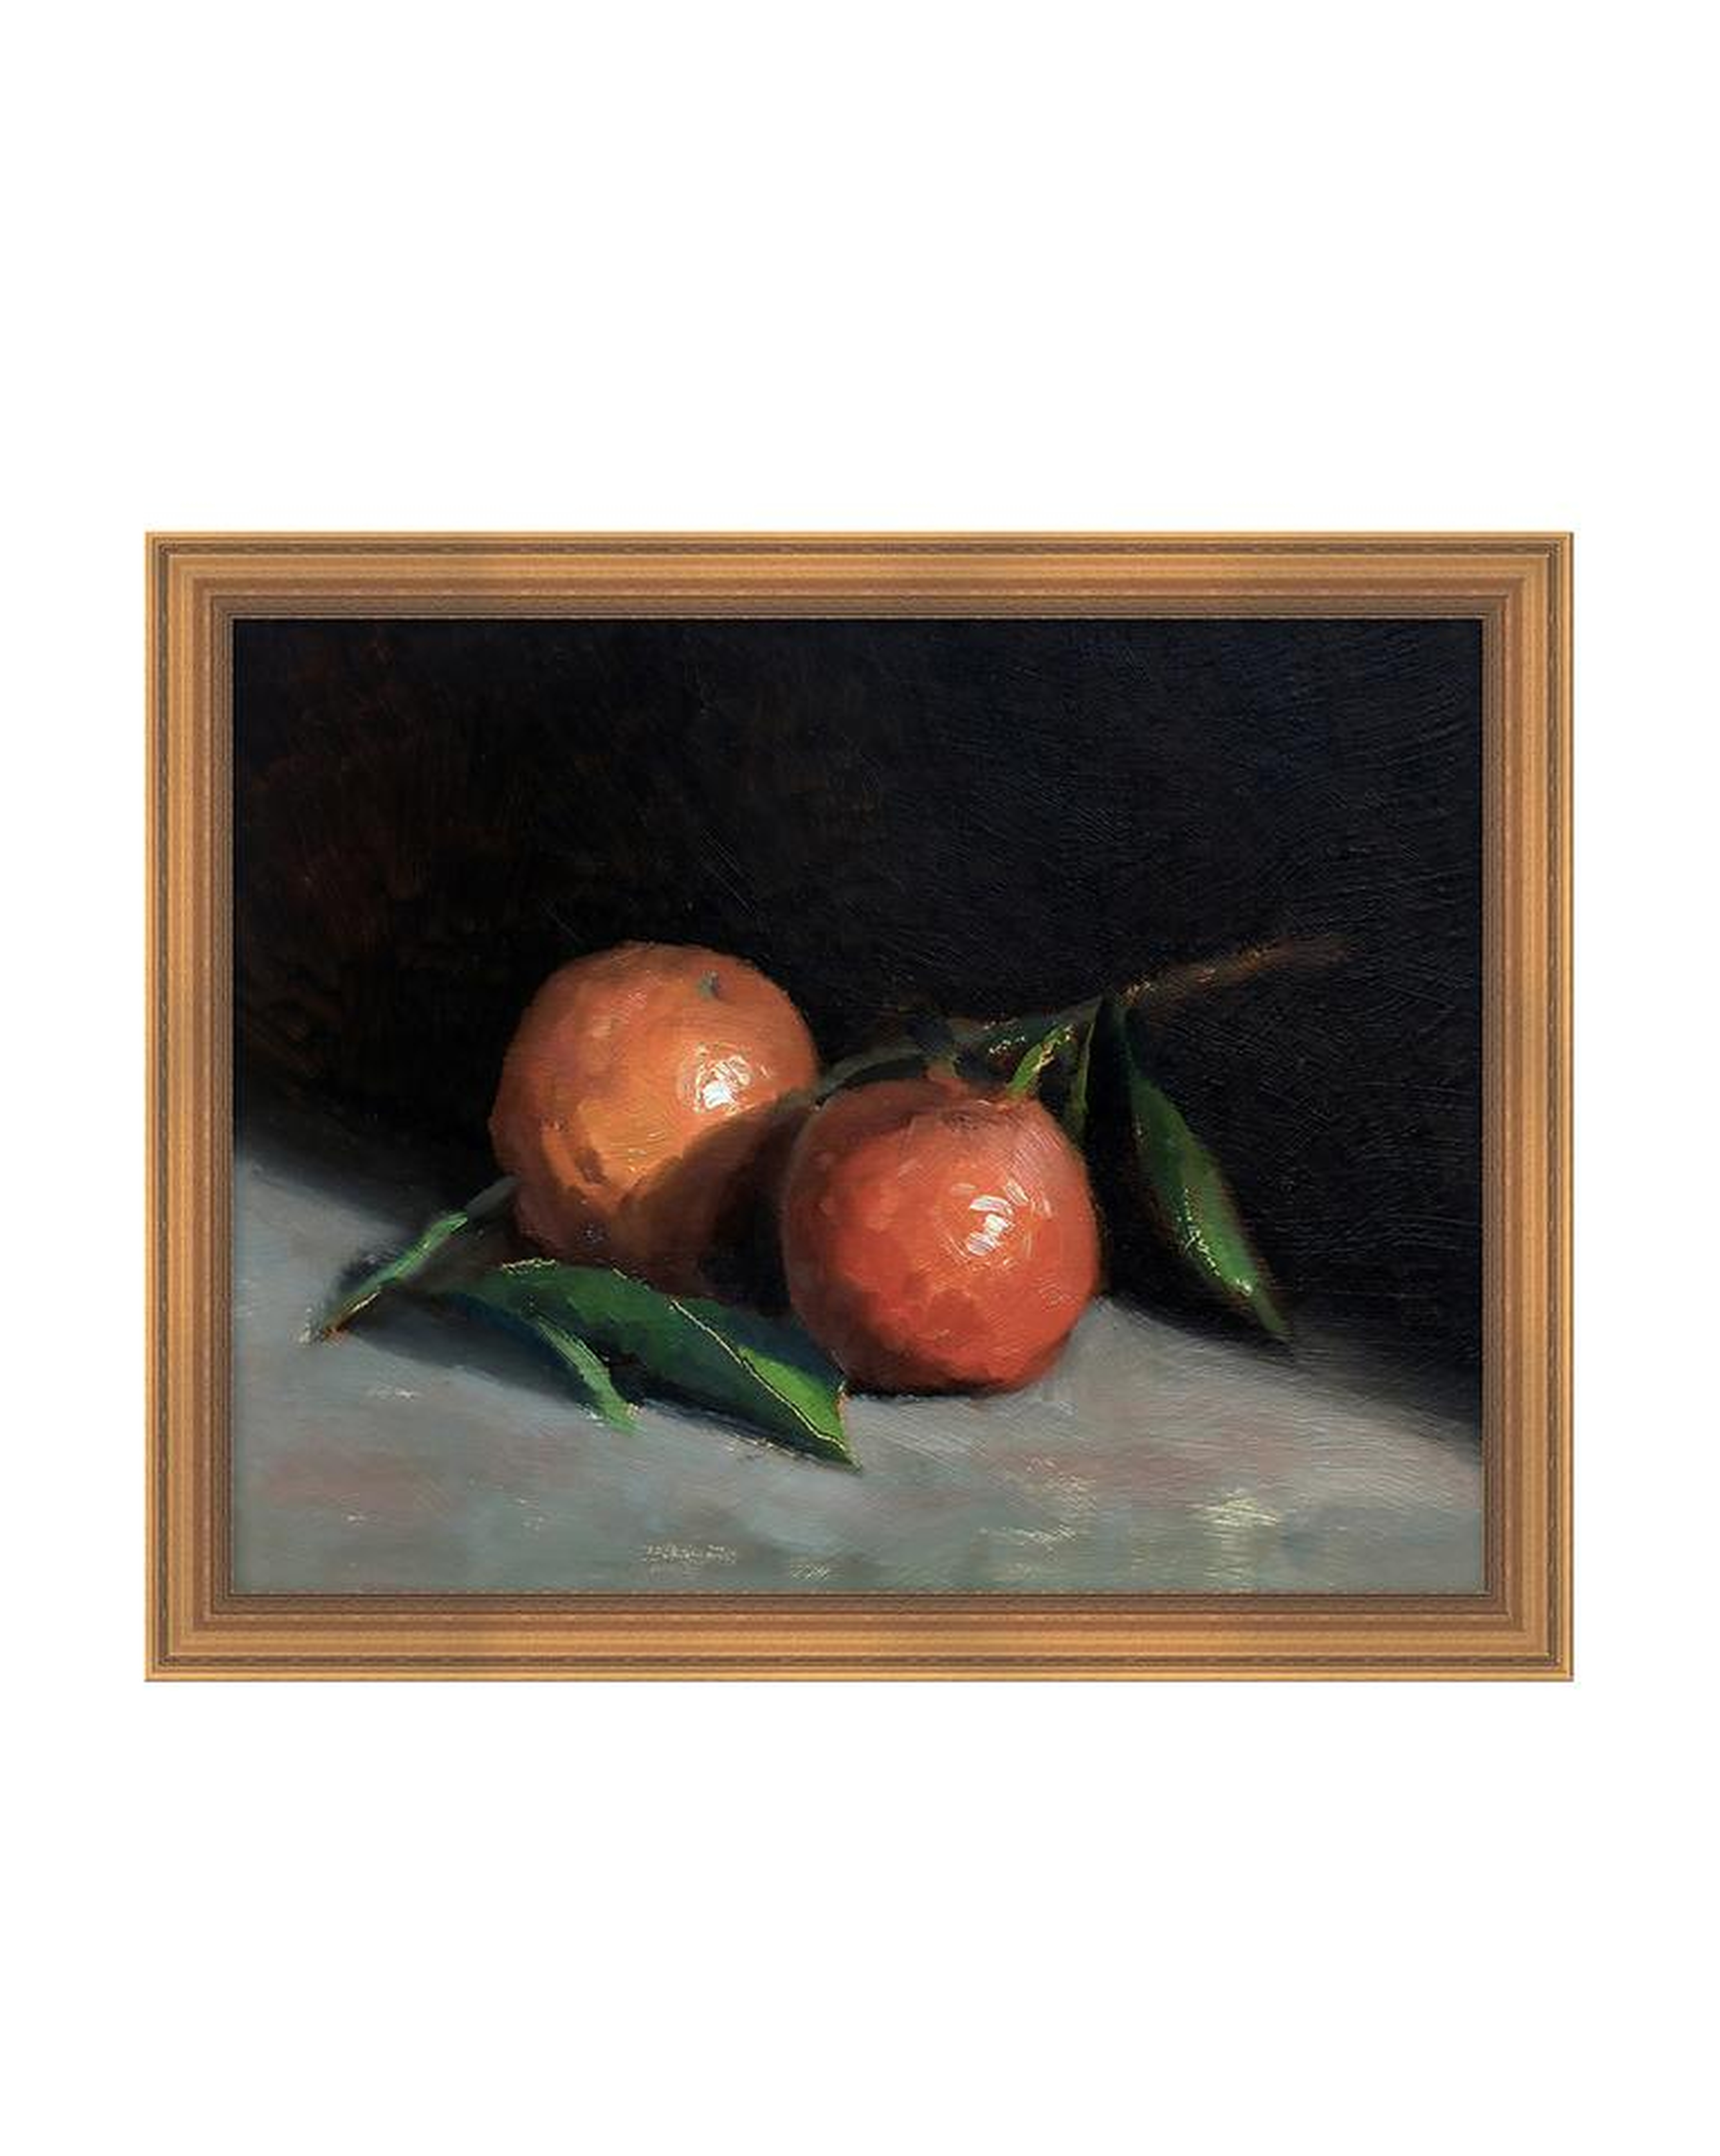 STILL LIFE WITH ORANGES - McGee & Co.